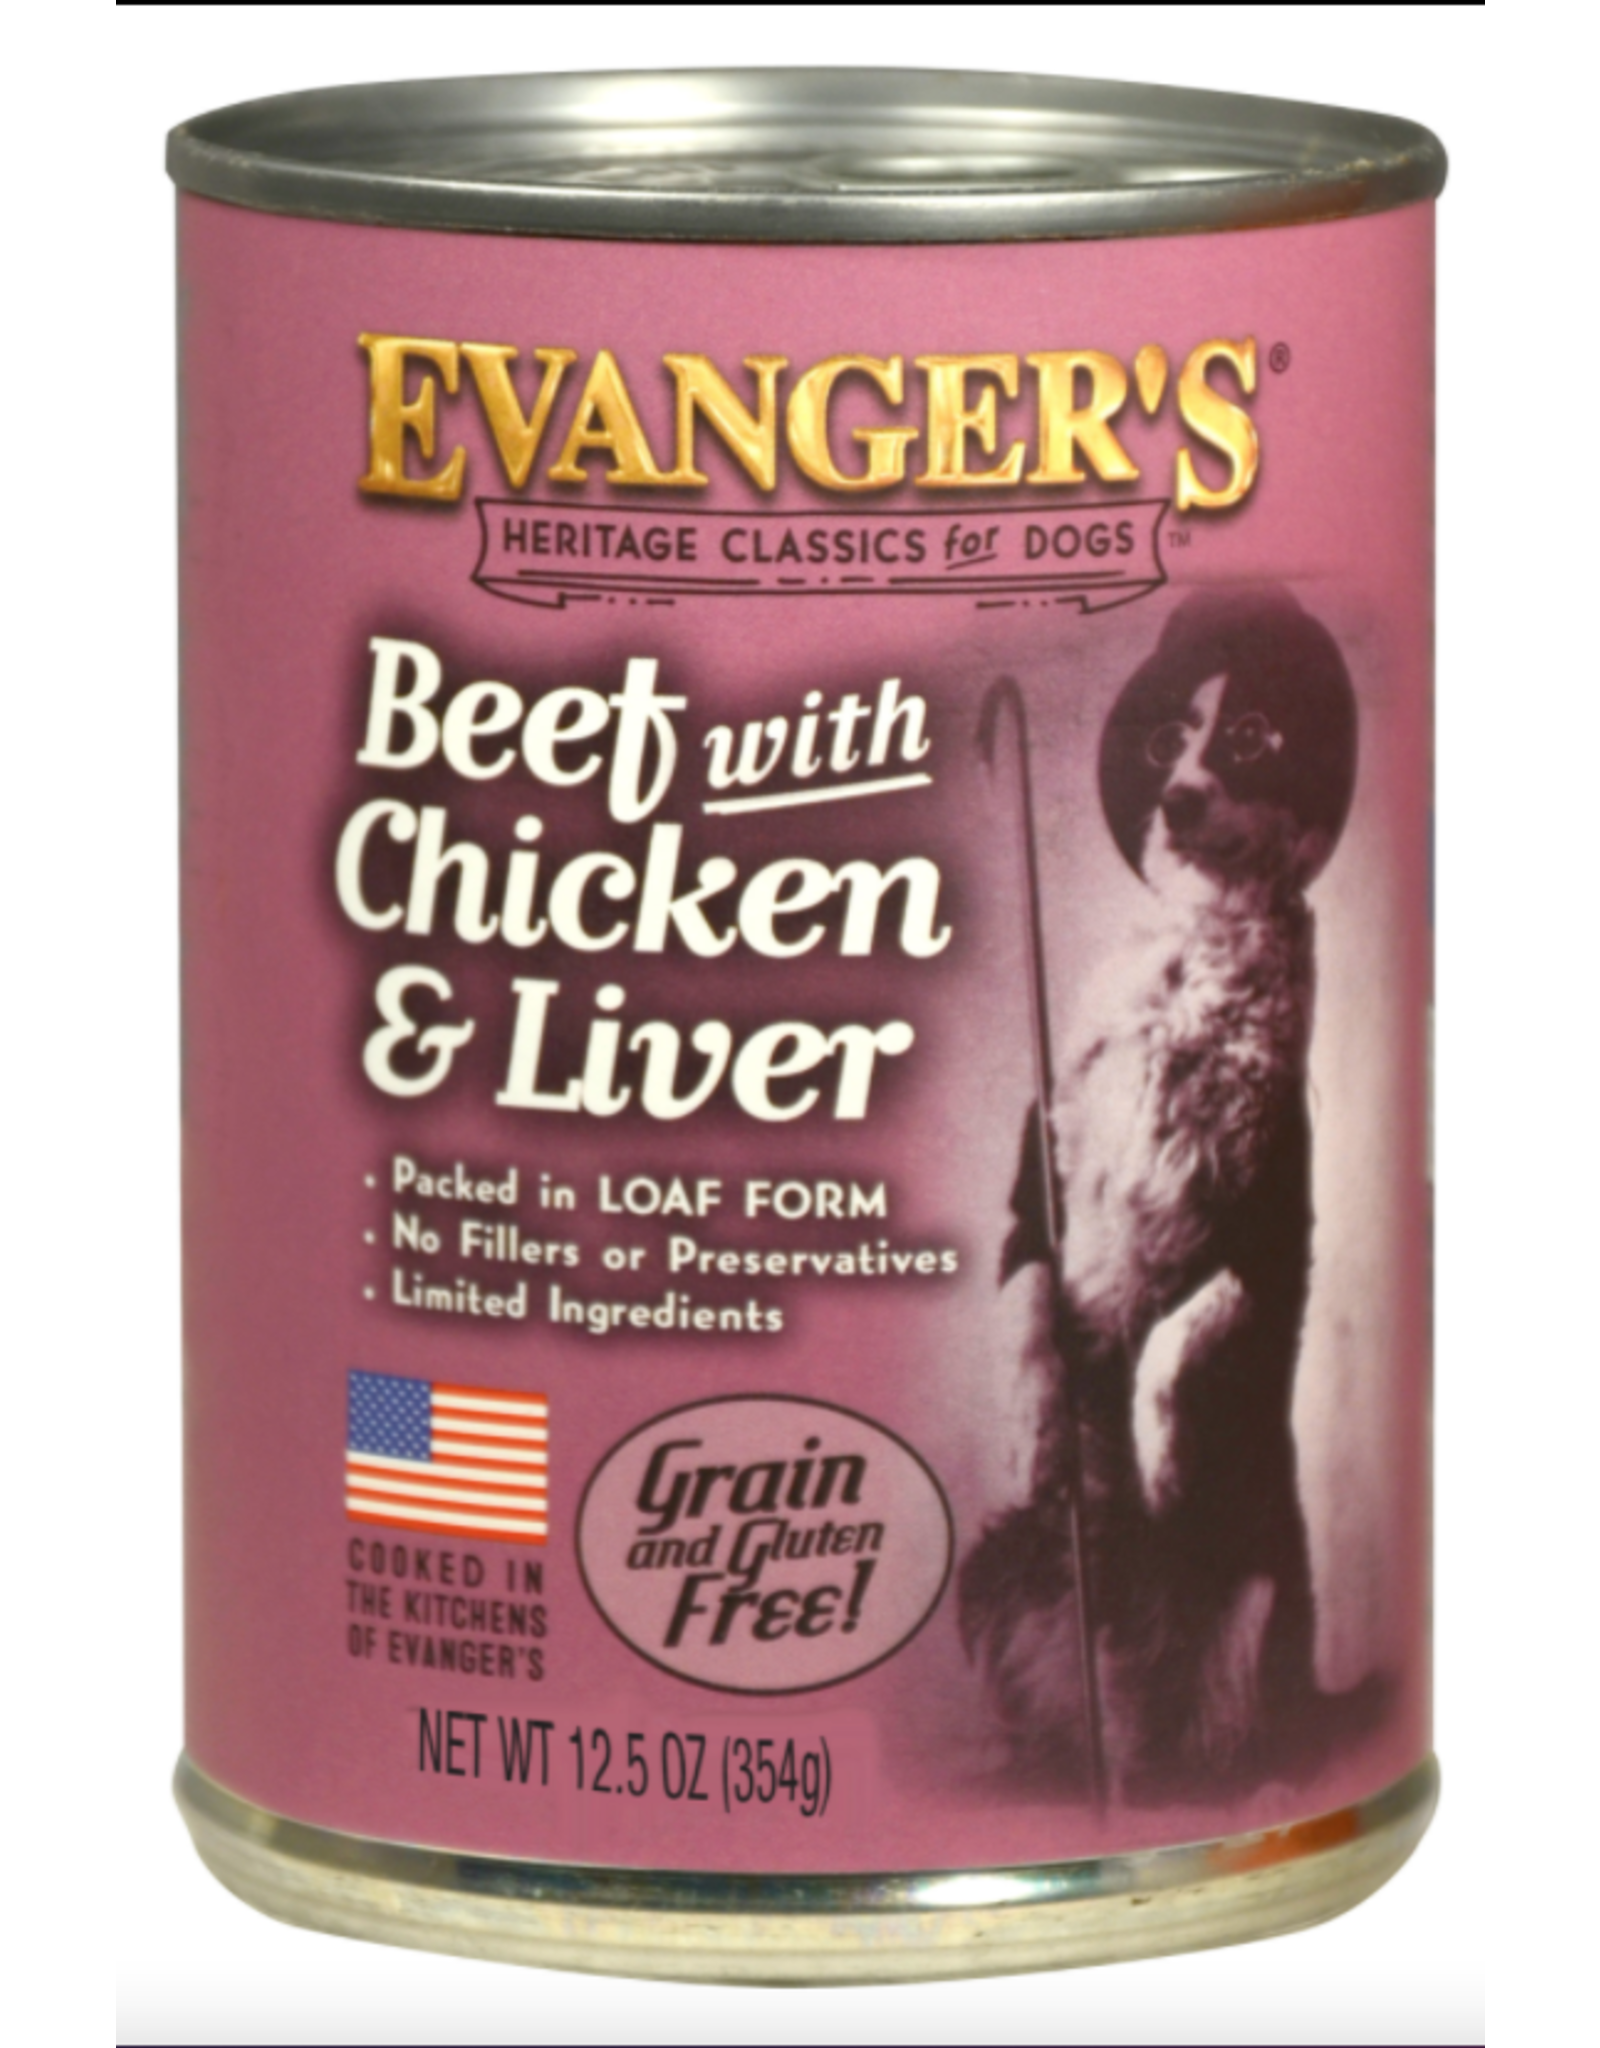 Evangers Evanger's Heritage Classic Beef with Chicken & Liver Dog Food 12.6oz